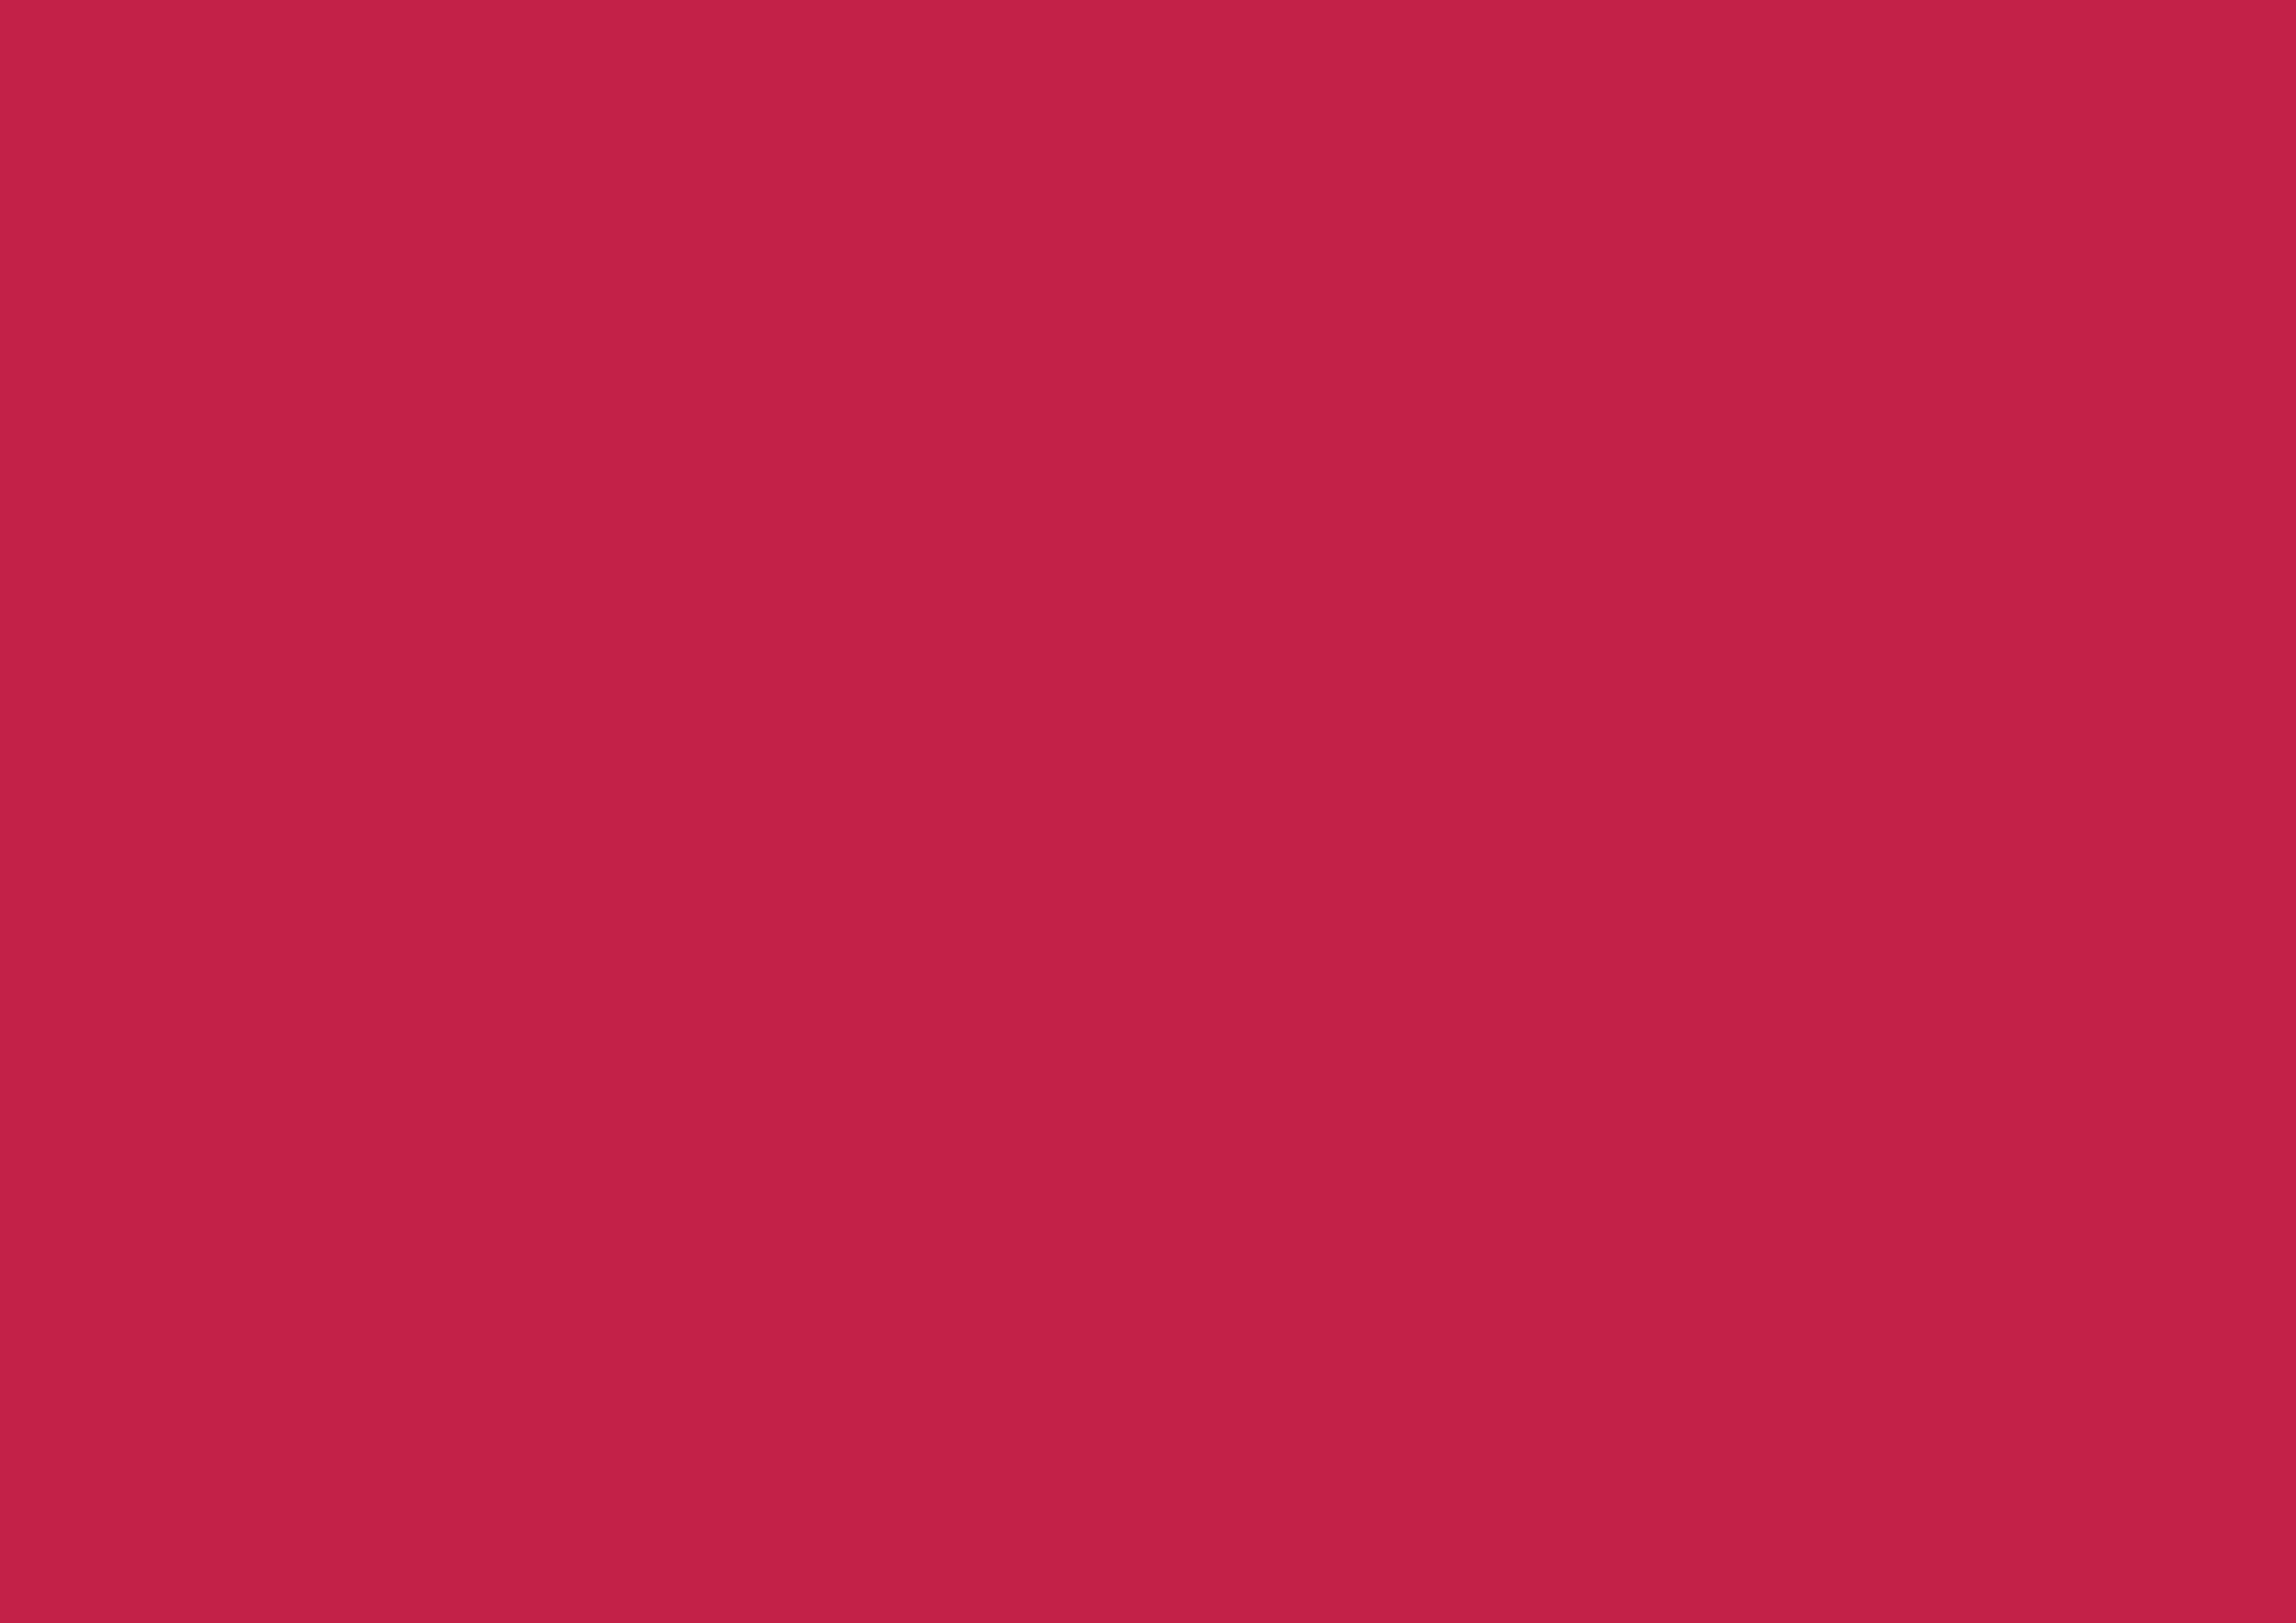 3508x2480 Bright Maroon Solid Color Background